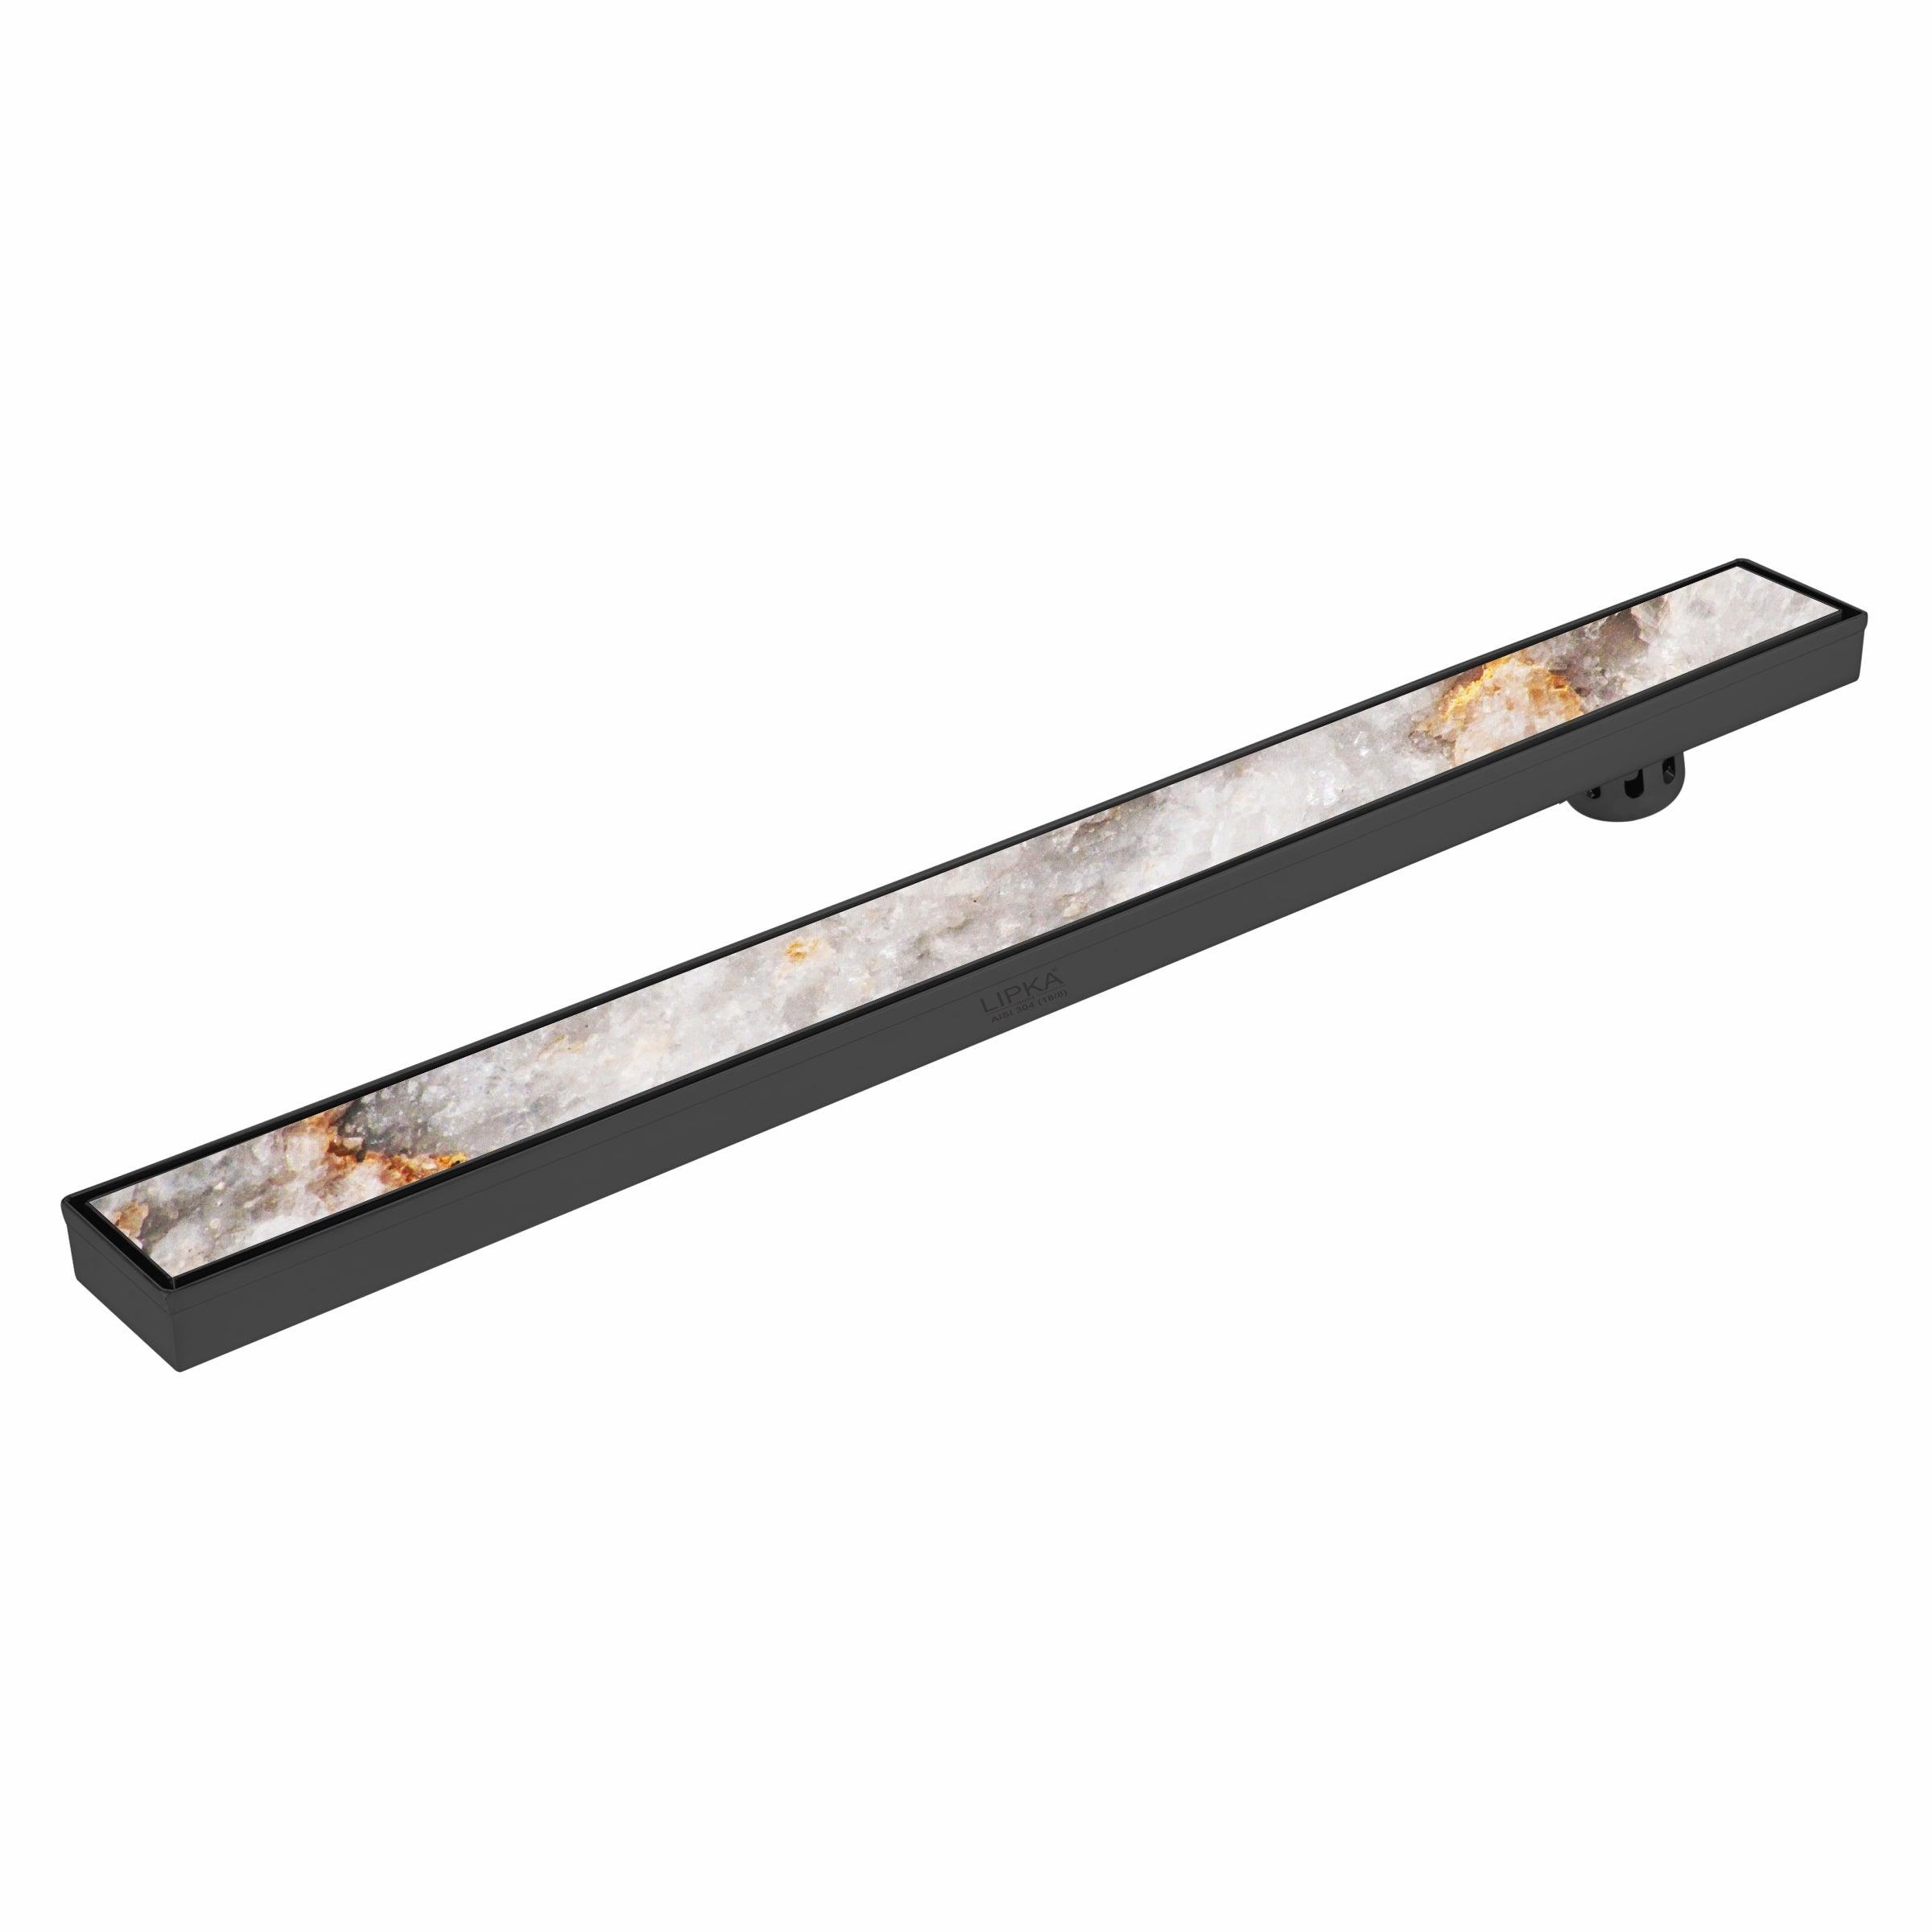 Tile Insert Shower Drain Channel - Black (48 x 3 Inches)